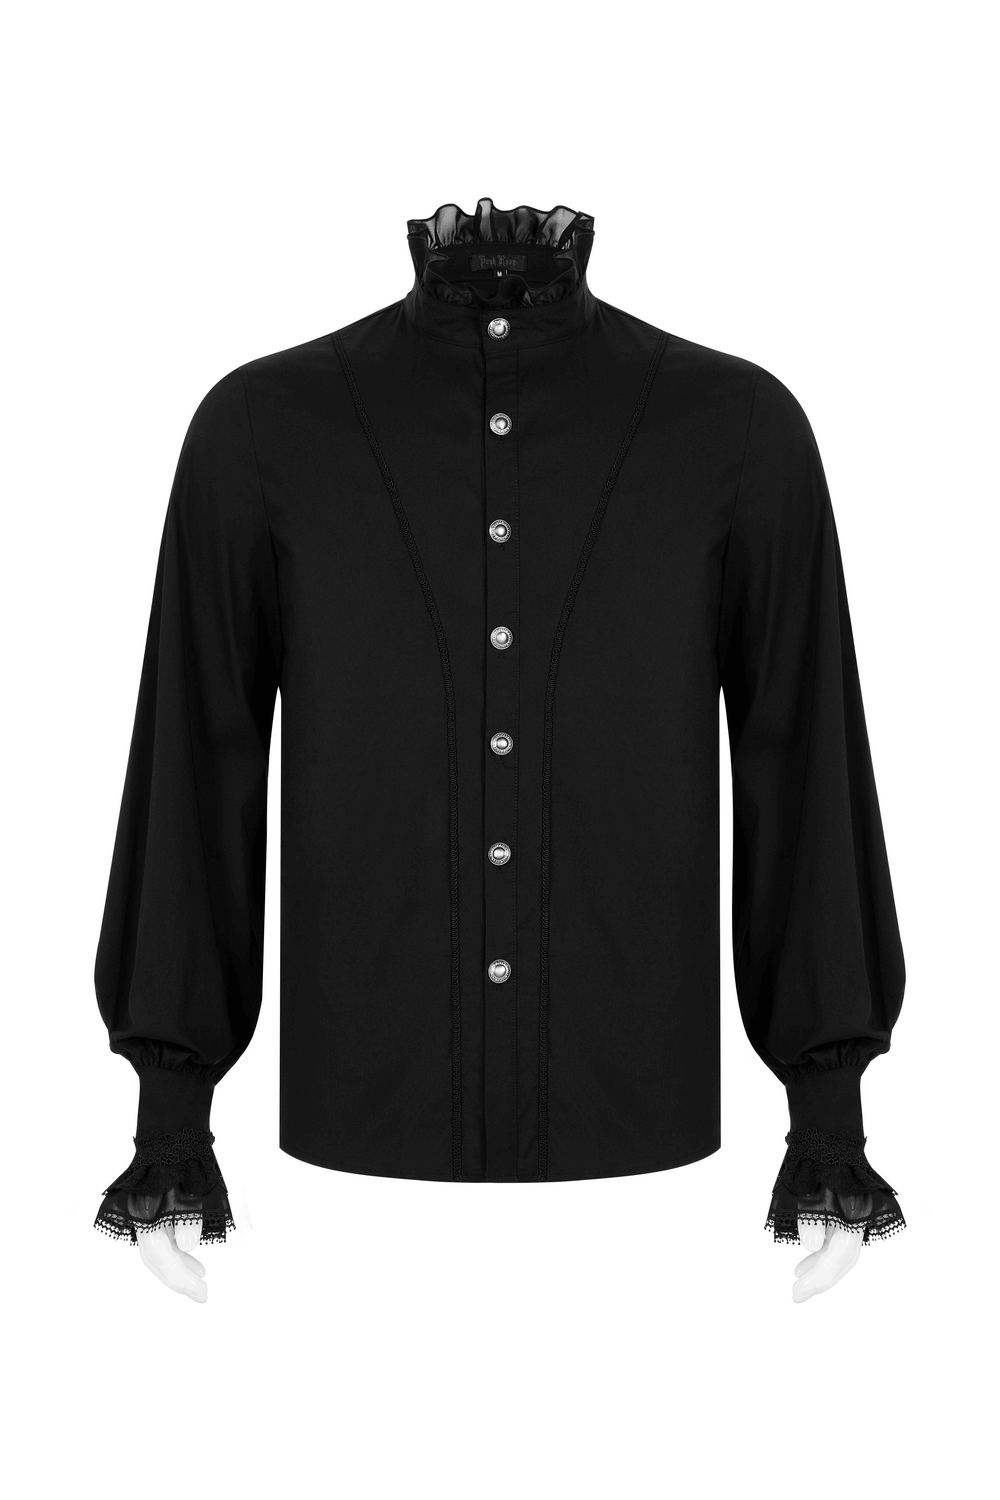 Men's Gothic and Rocker Shirts - Edgy Styles, Unique Designs